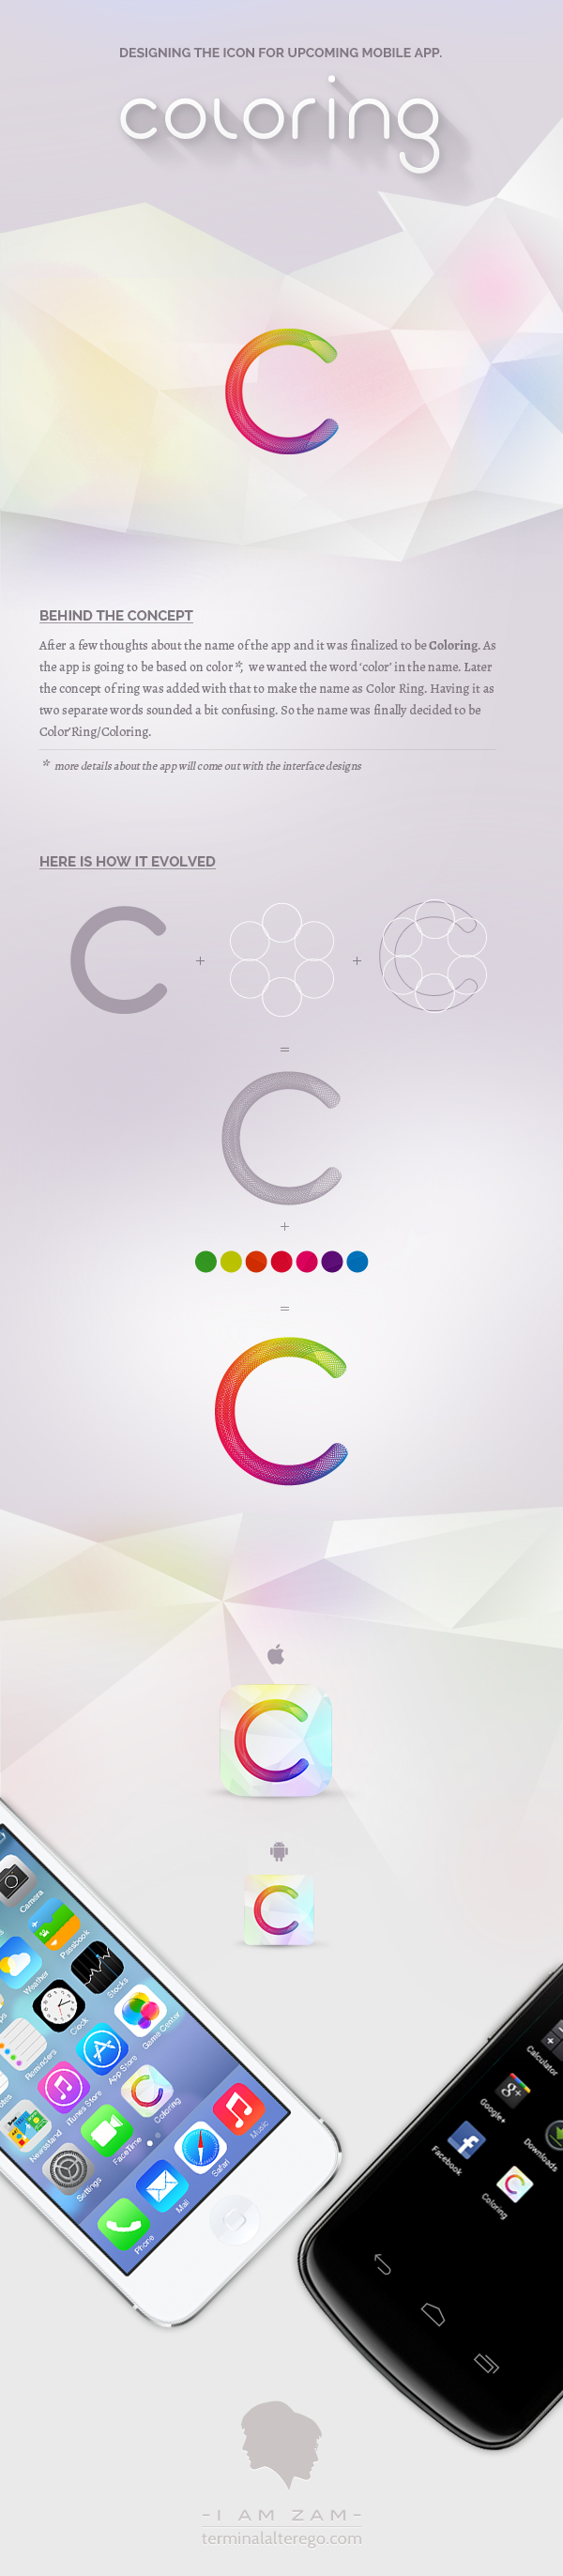 iPhone app icon Android Launcher Icon coloring ring Color APP app icon iOS App ui design